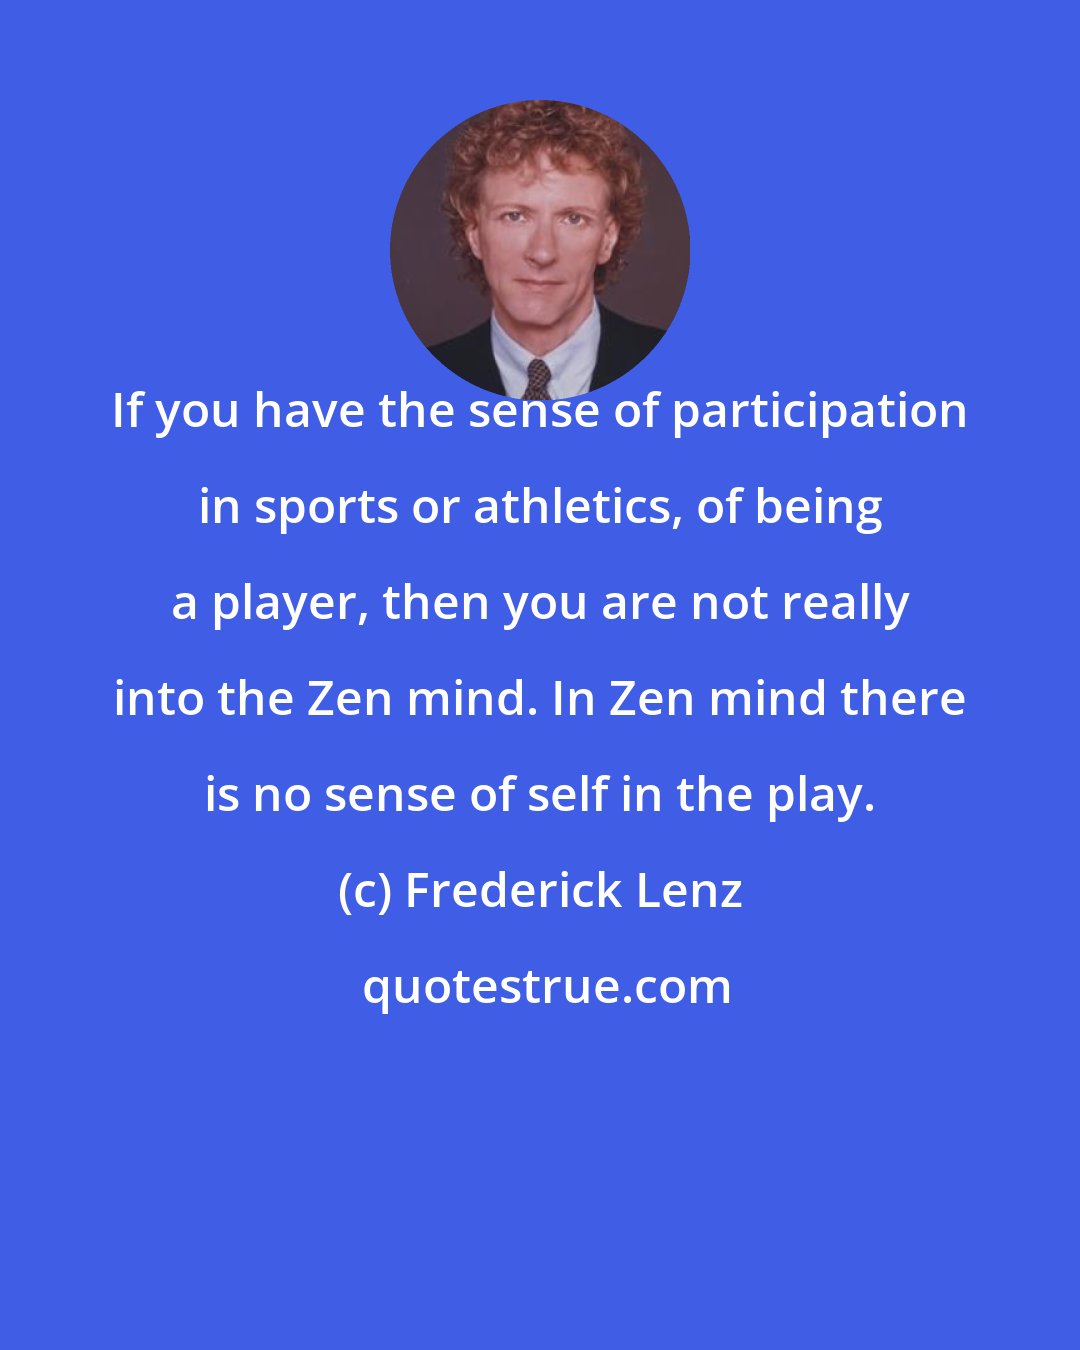 Frederick Lenz: If you have the sense of participation in sports or athletics, of being a player, then you are not really into the Zen mind. In Zen mind there is no sense of self in the play.